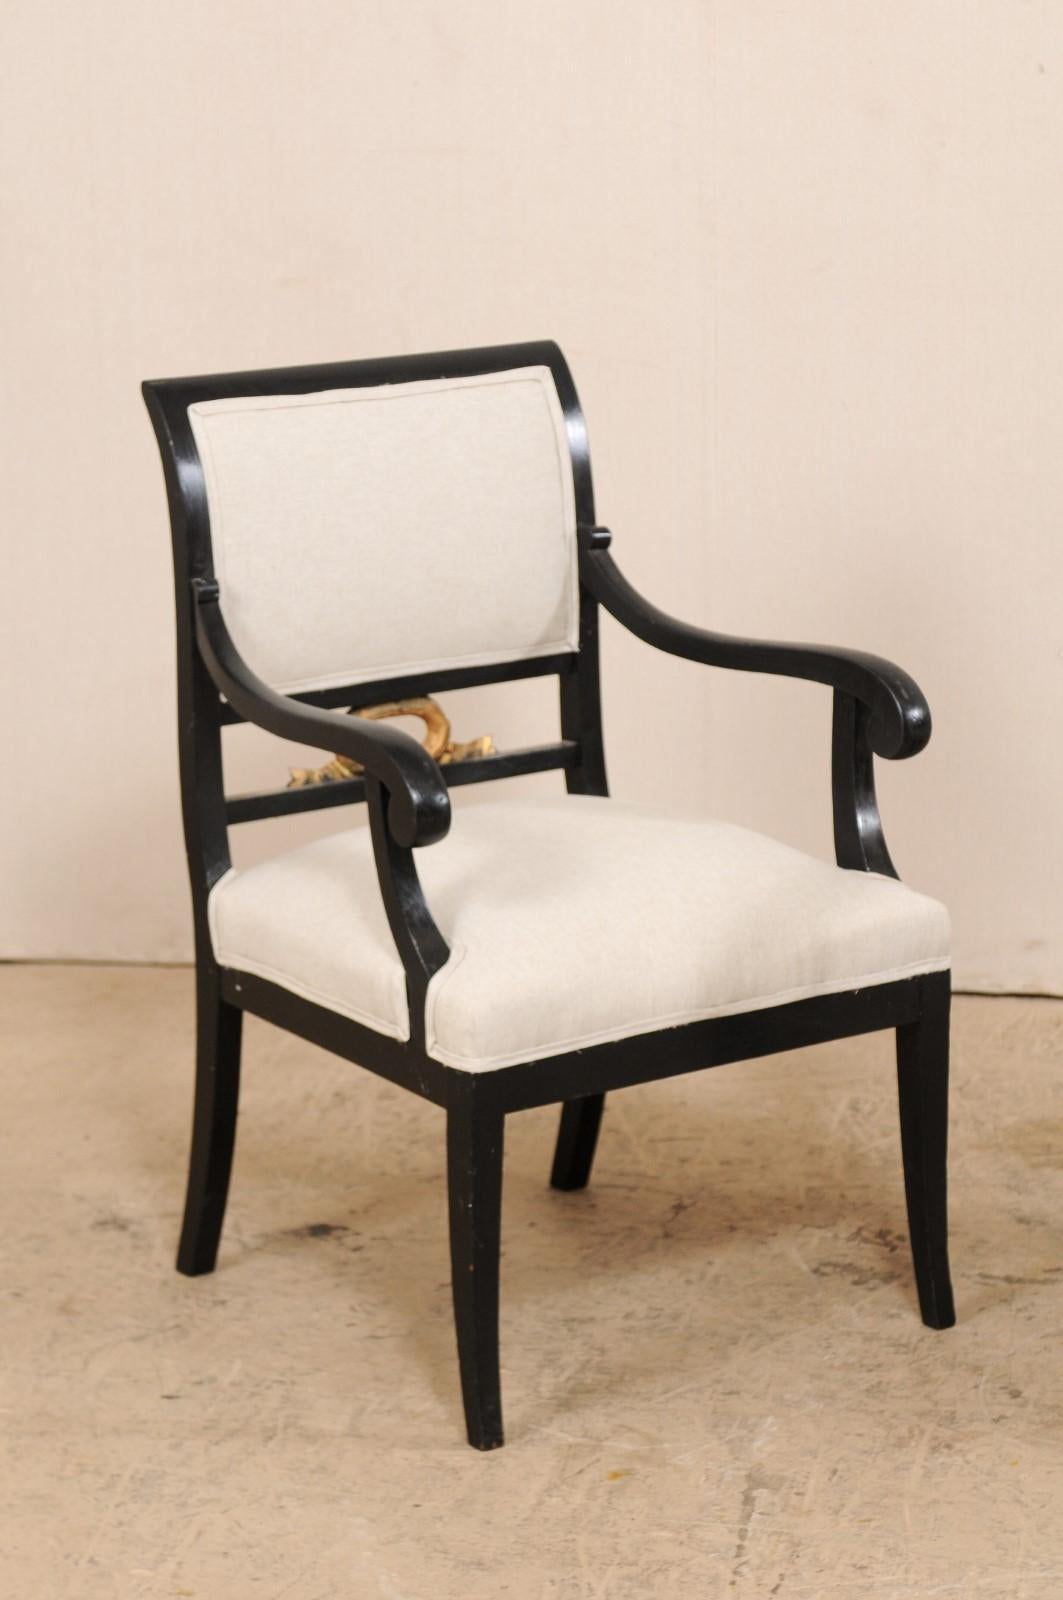 Carved Pair of Swedish Empire Armchairs in Black w/Gold Accents from the Mid-19th C. For Sale